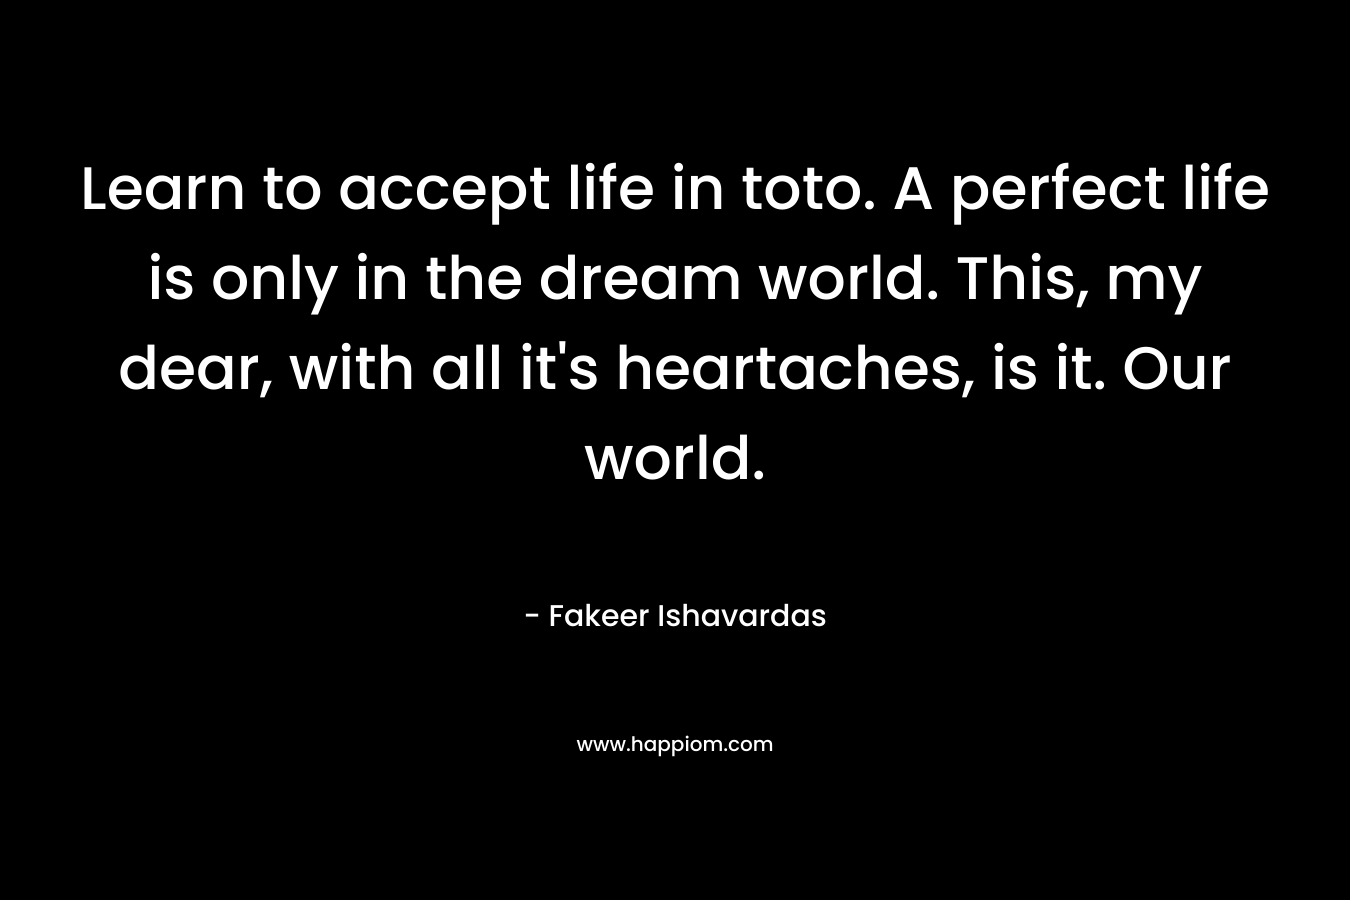 Learn to accept life in toto. A perfect life is only in the dream world. This, my dear, with all it's heartaches, is it. Our world.